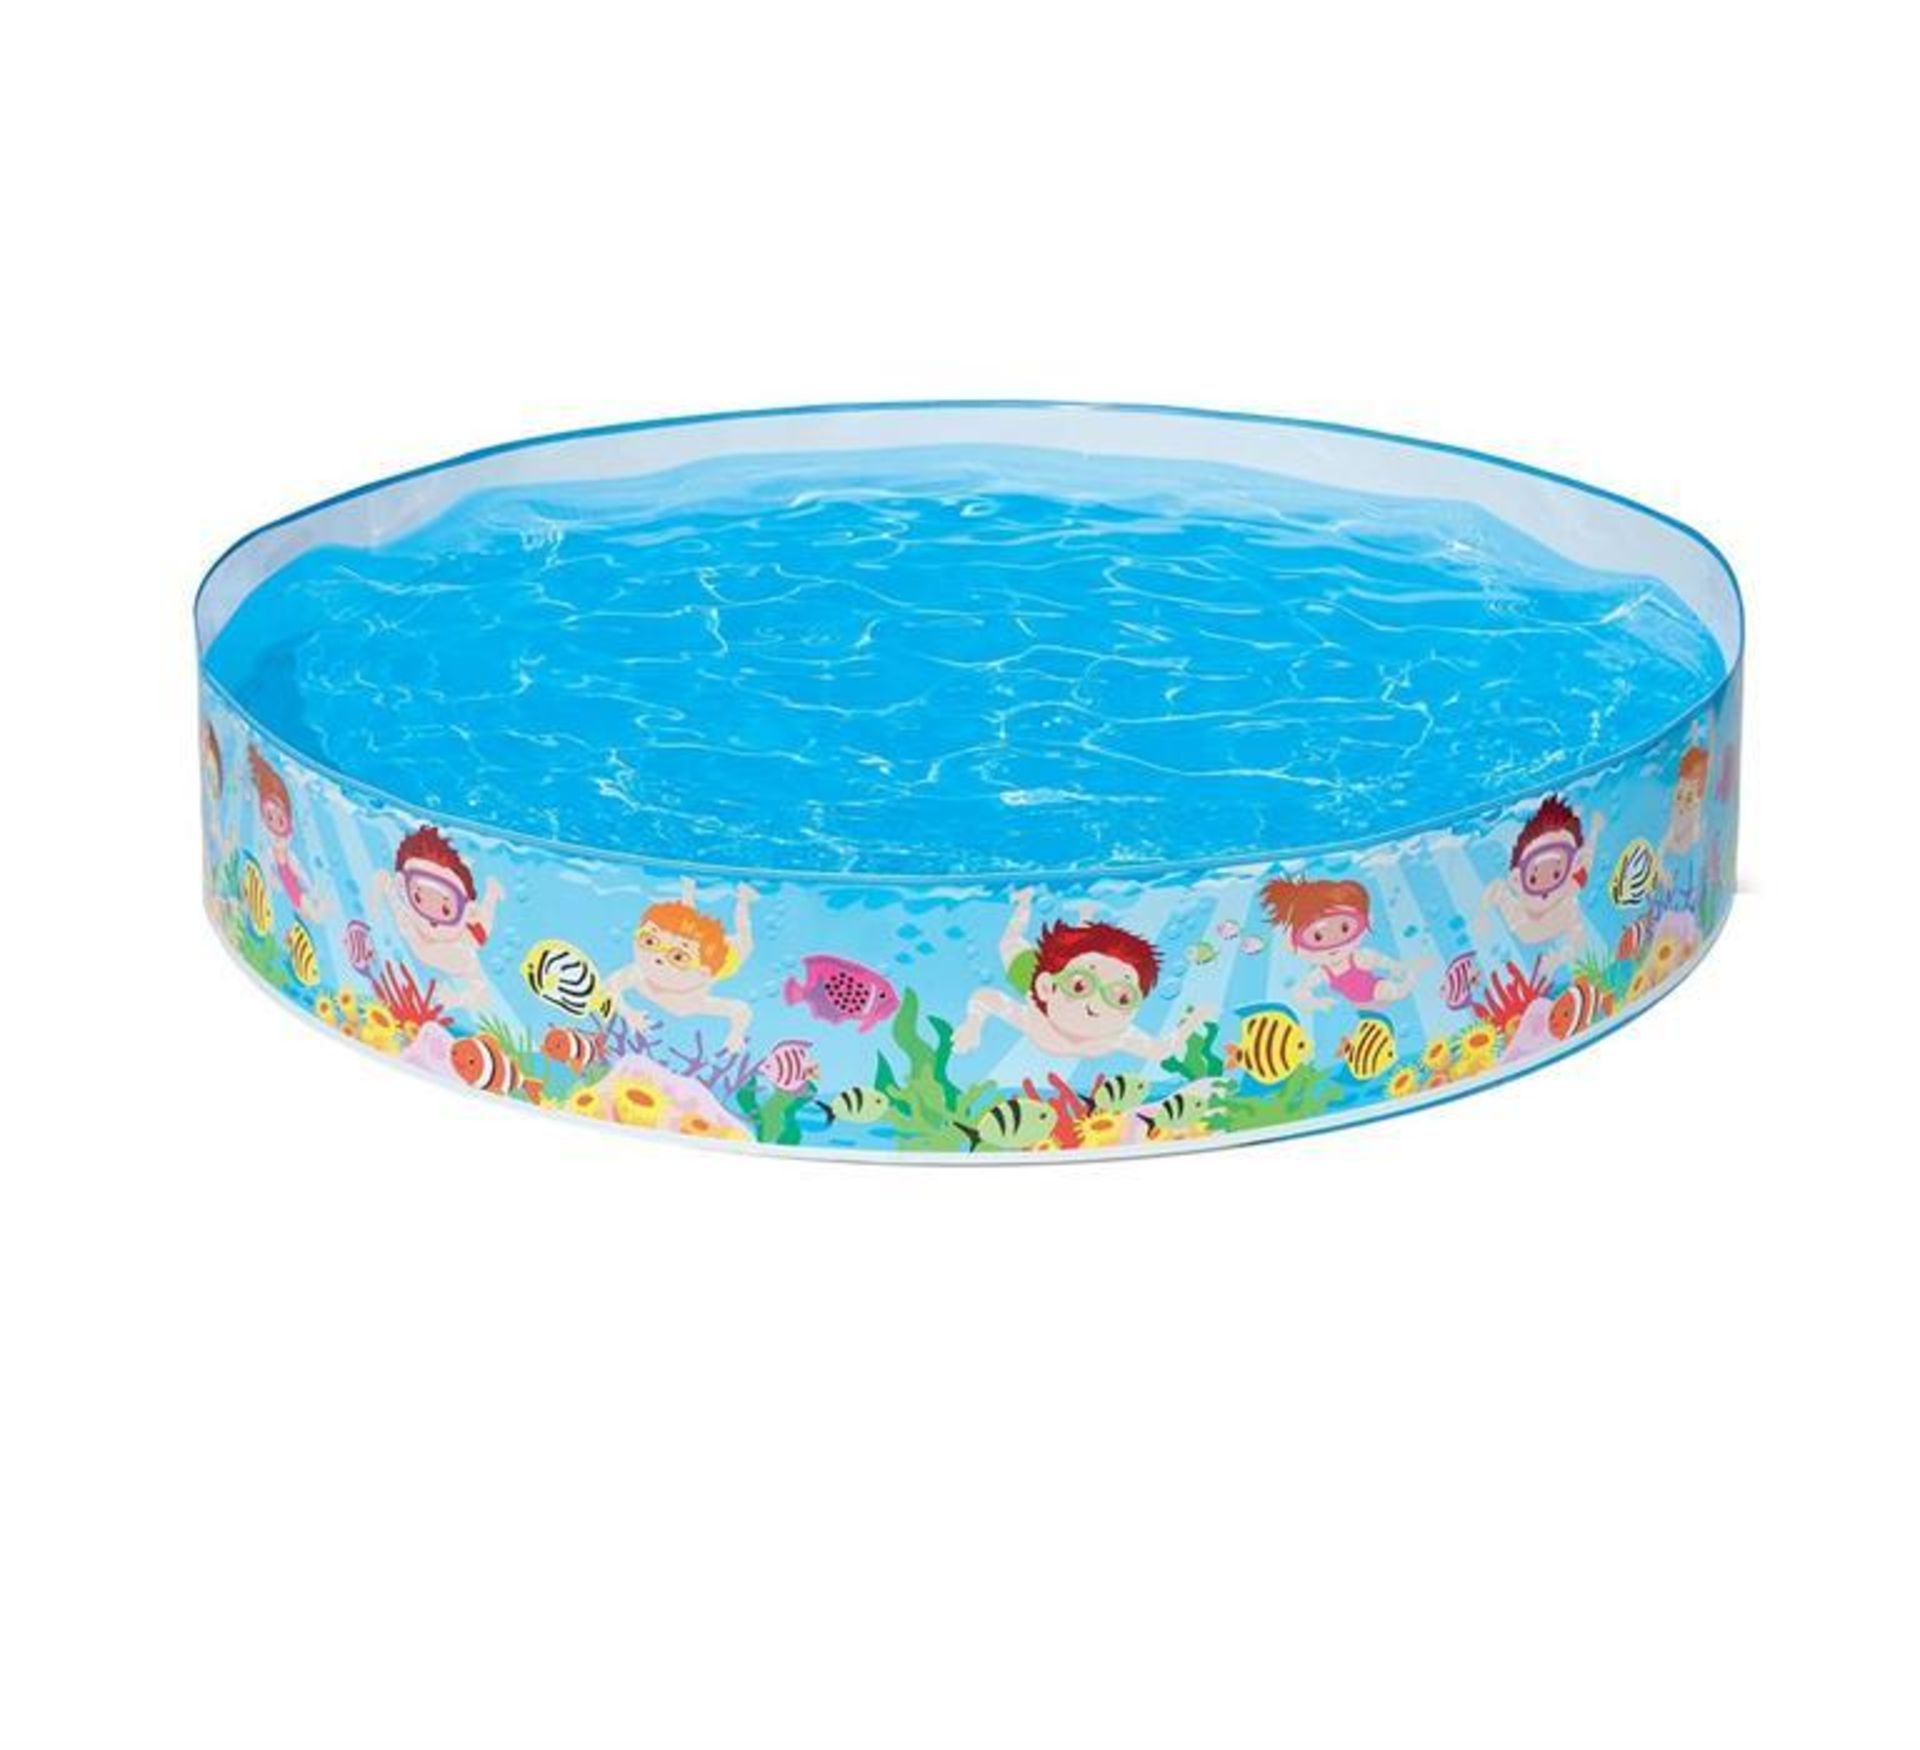 Approximately 153 x Intex Pool and Beach Setup Beach Print Various Styles Swimming Pools RRP £1220